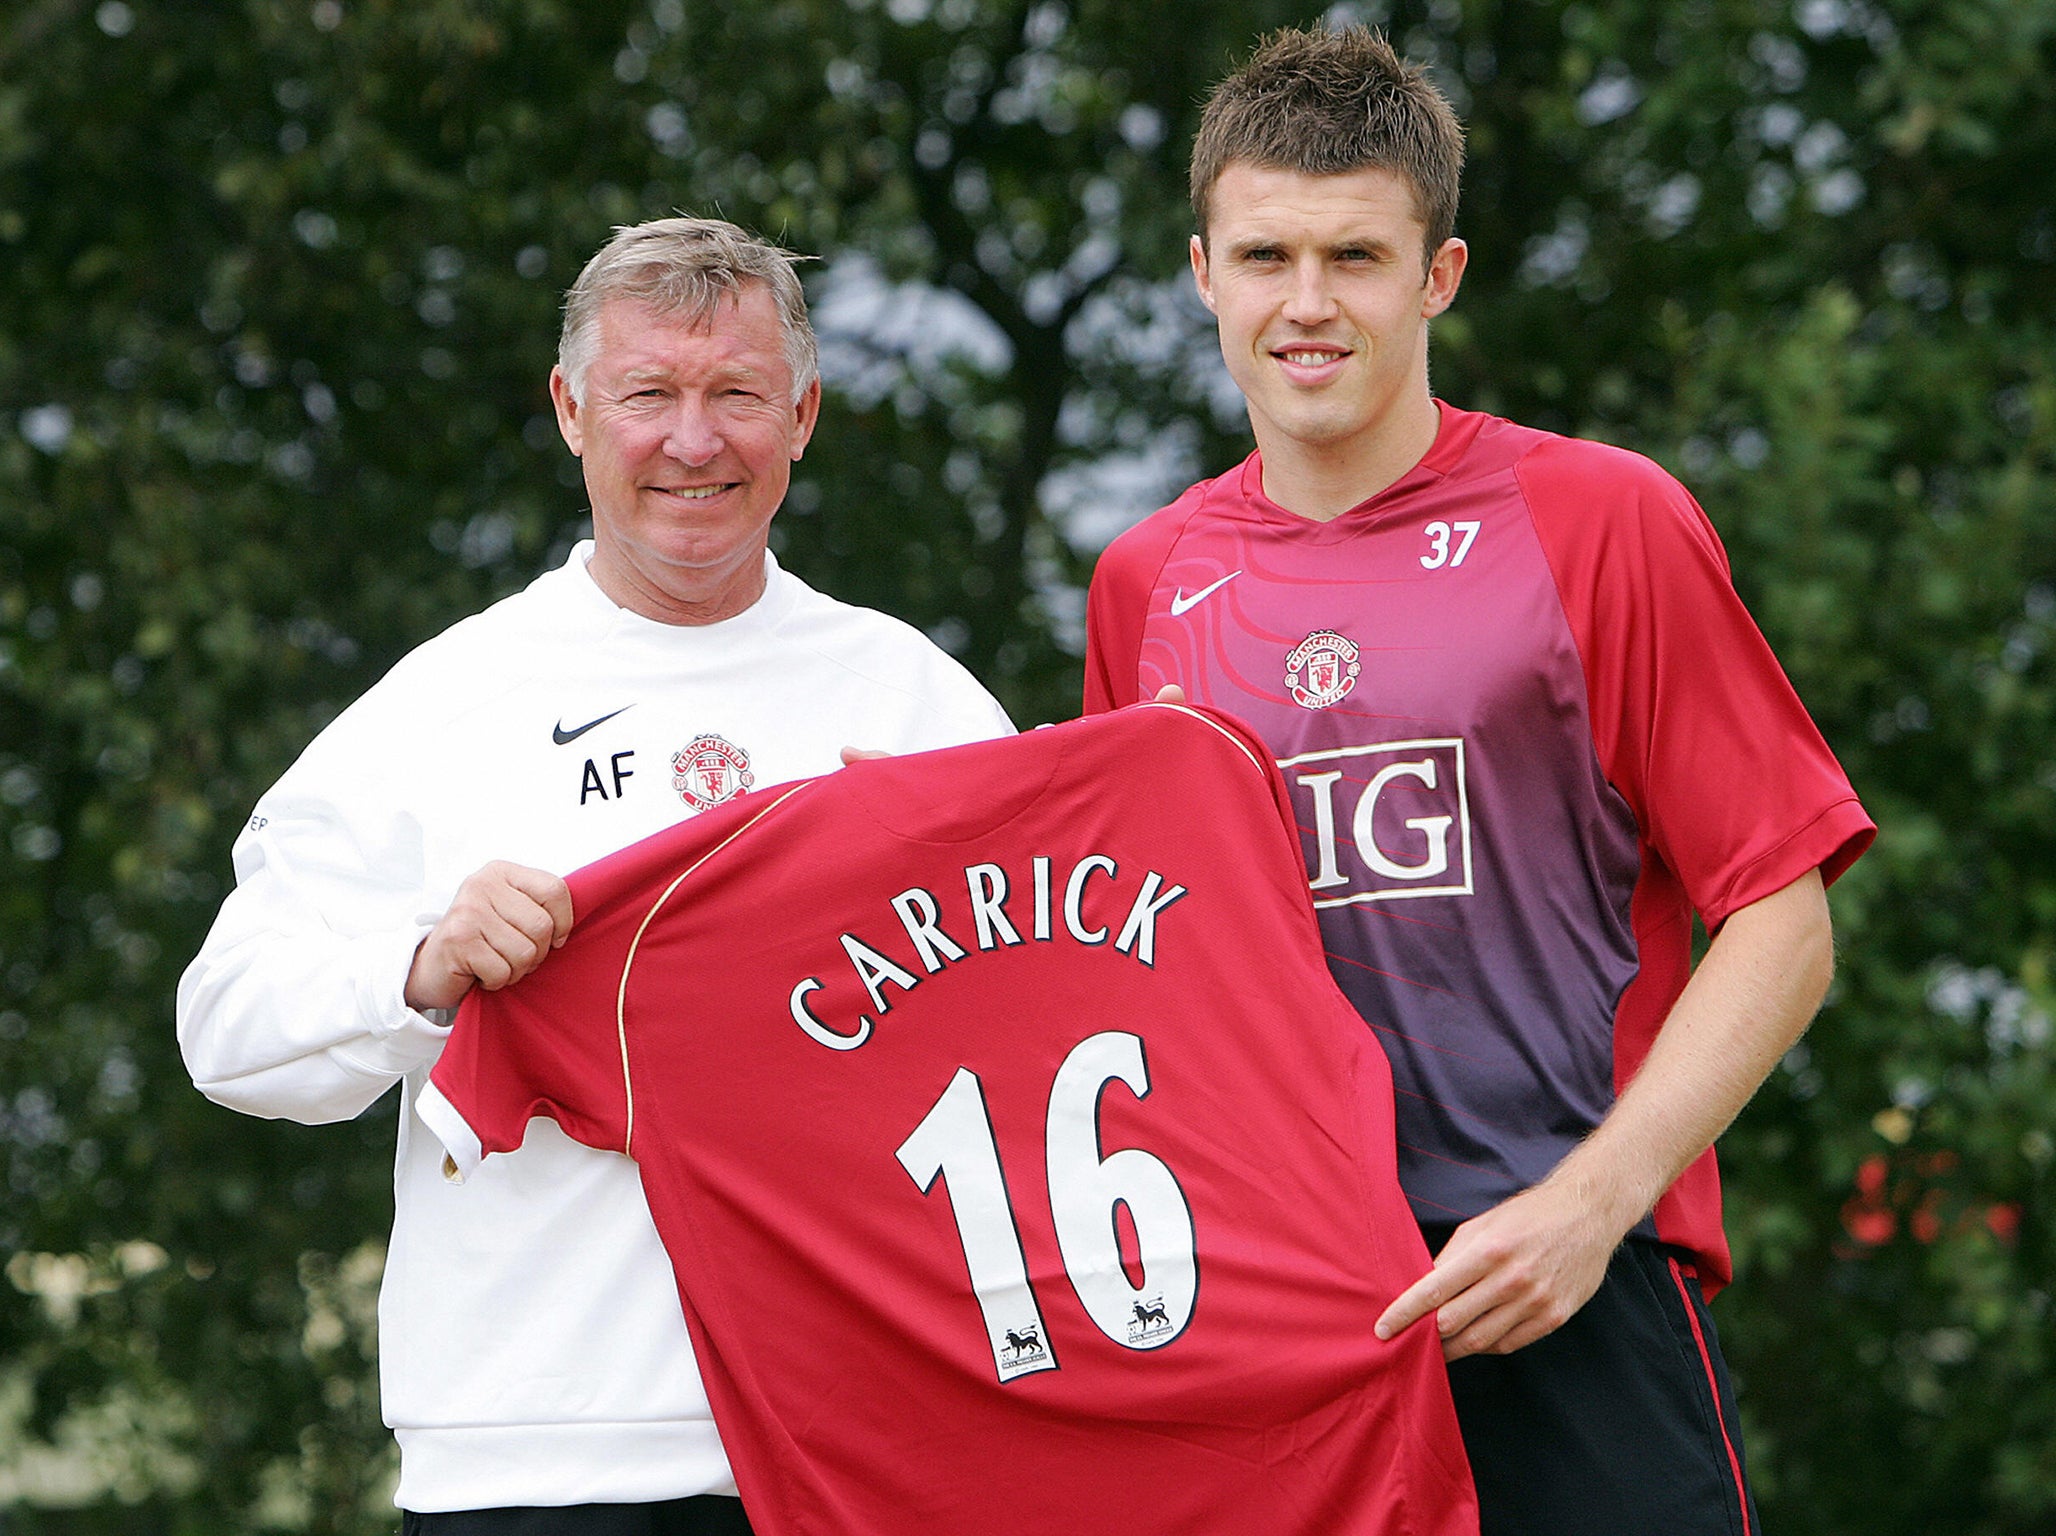 Carrick was signed to help replace Keane